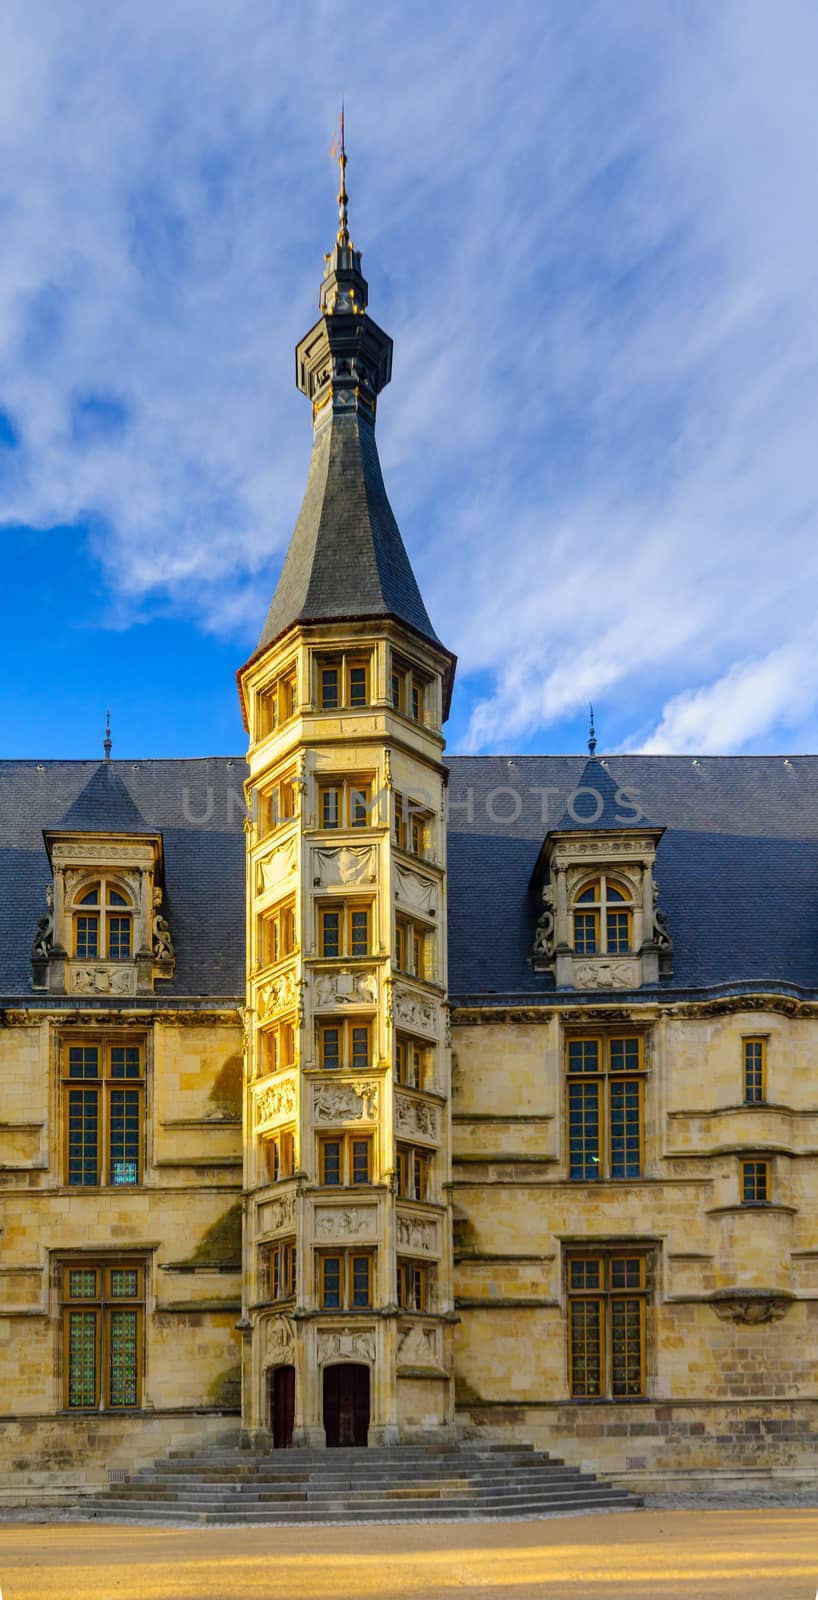 View of the Ducal Palace facade in Nevers, Burgundy, France